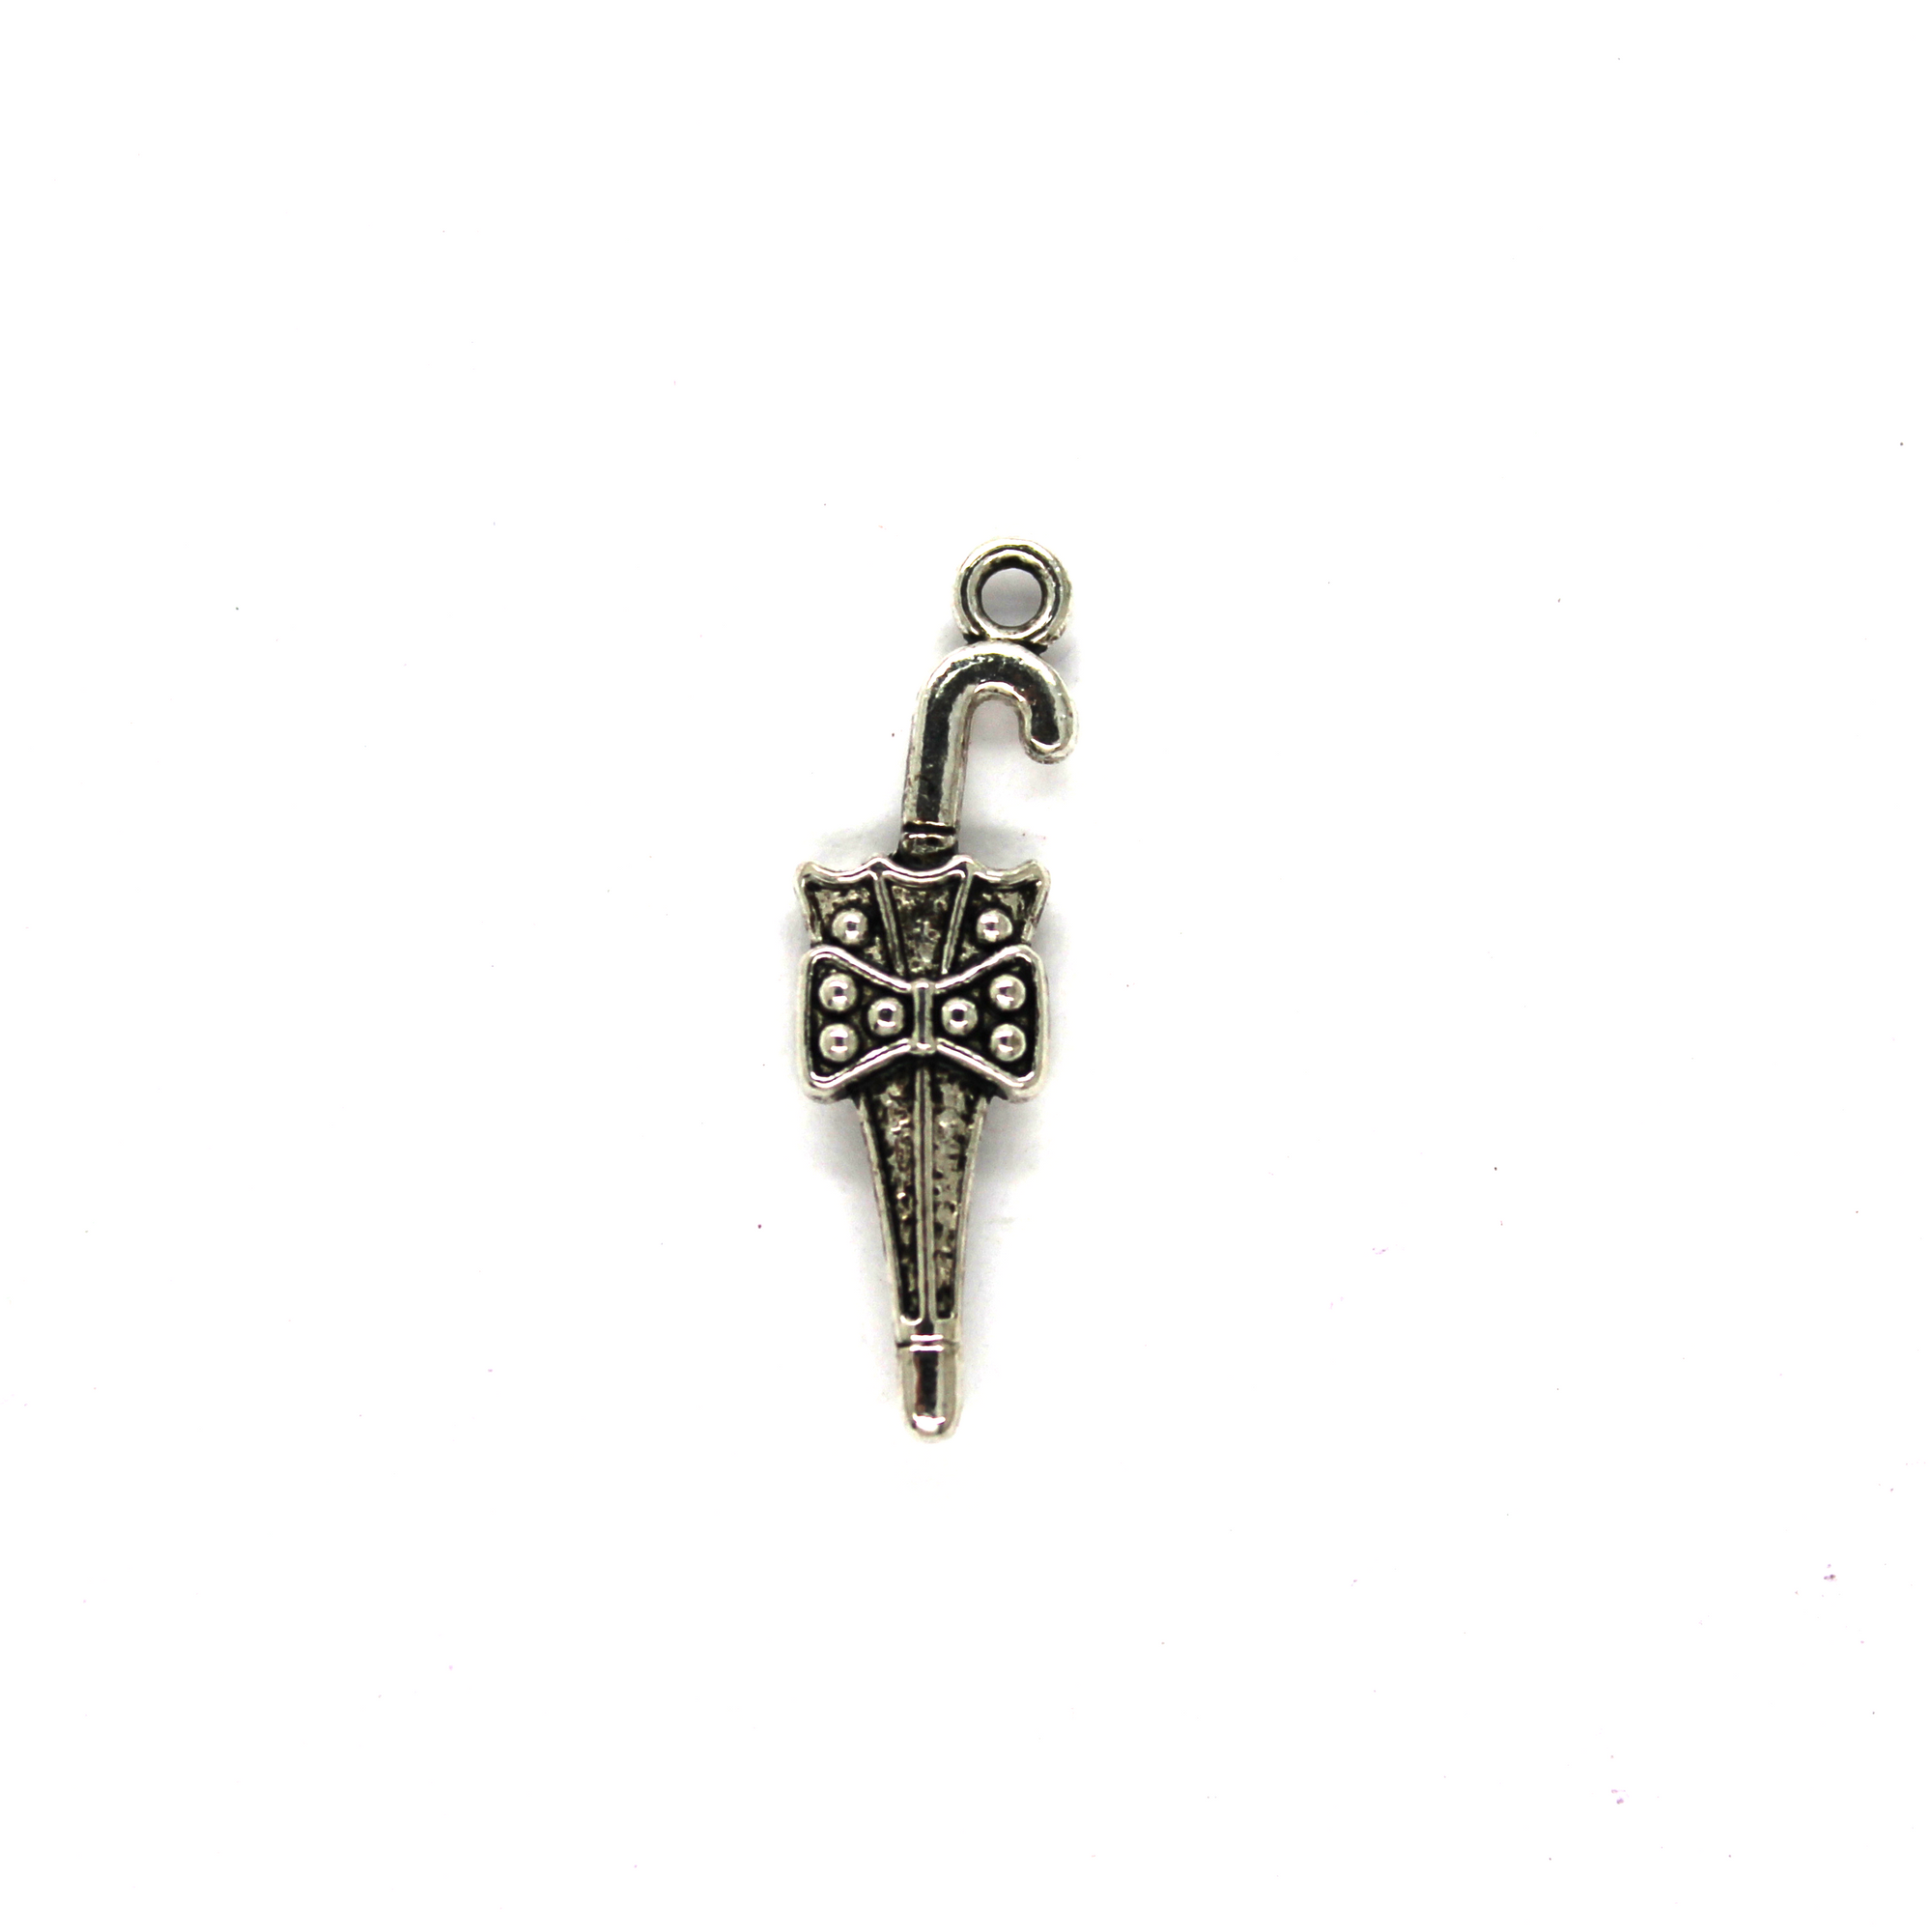 Charms, Bow Tie Umbrella, Silver, Alloy, 28mm X 7.5mm X 4mm, Sold Per pkg of 6